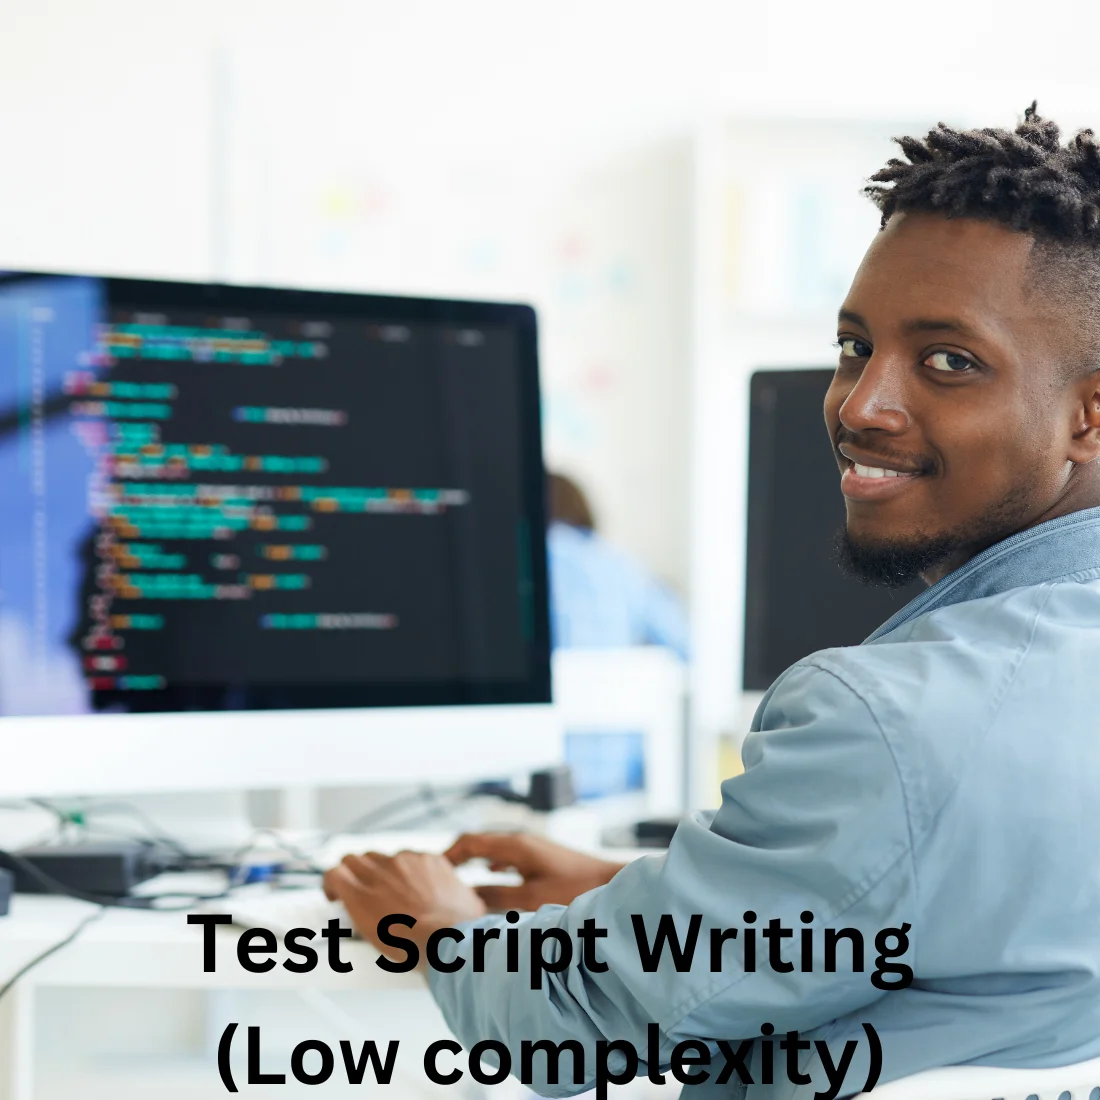 Test Script Writing (Low complexity)